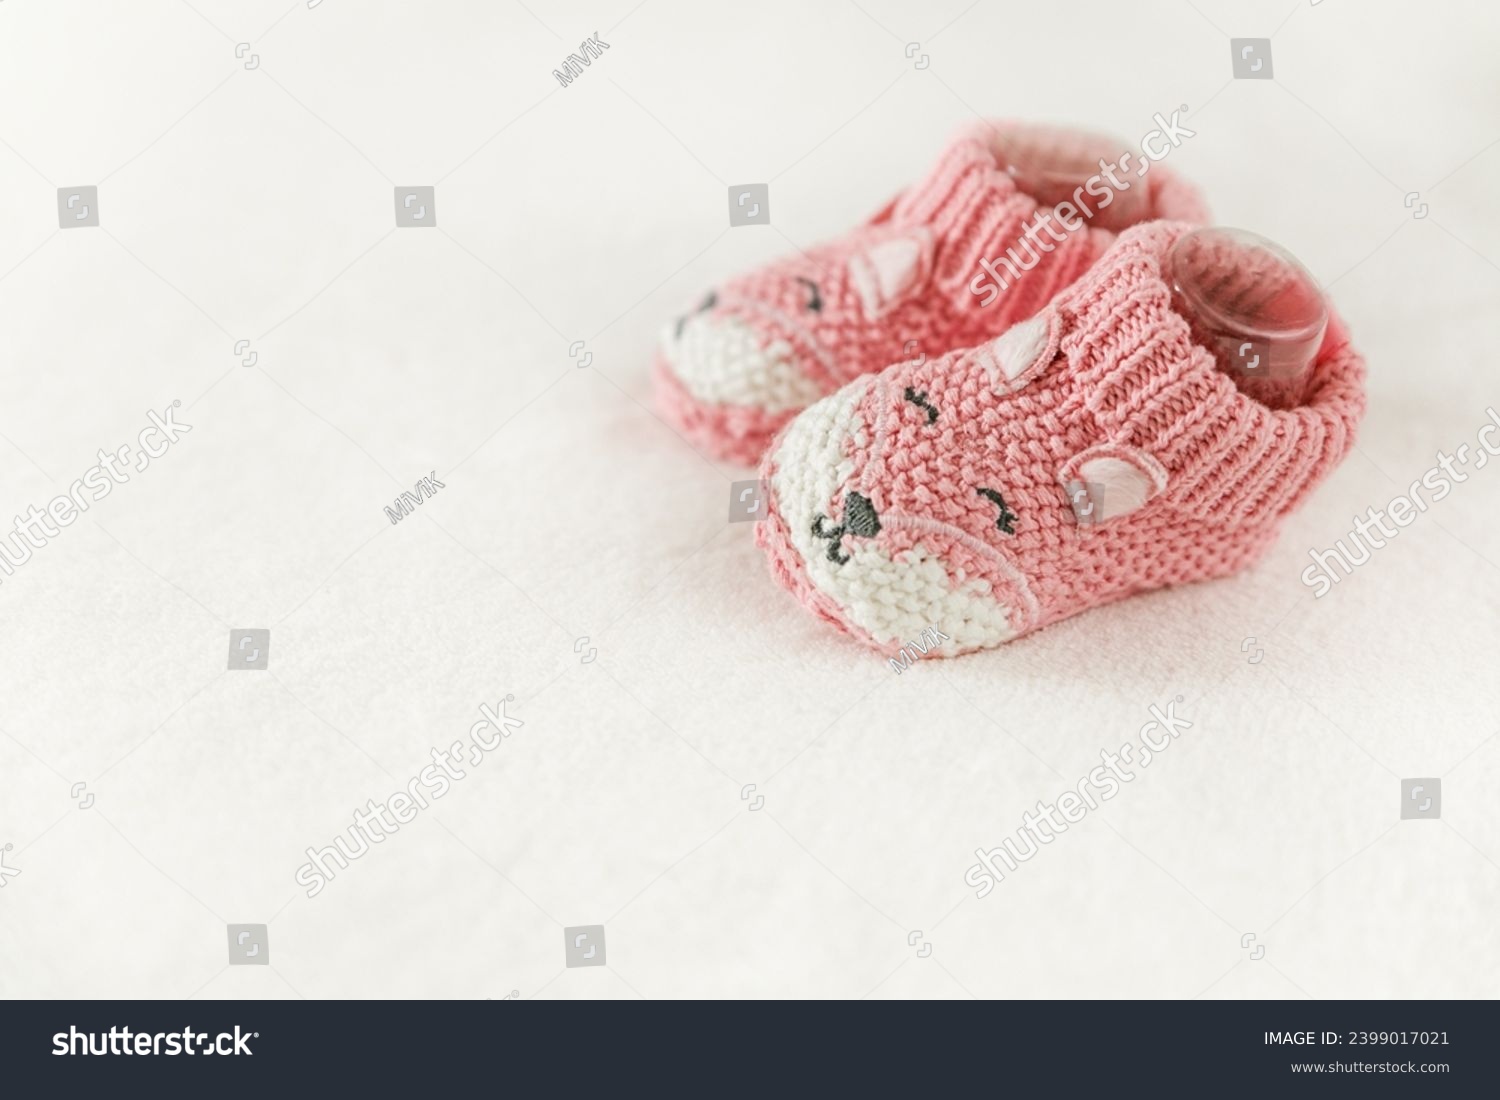 Pink knitted children's shoes on a white background with copy space. Pregnancy and motherhood concept, first birthday banner, handmade socks, baby warm clothes, handmade knitted socks, hobby. #2399017021